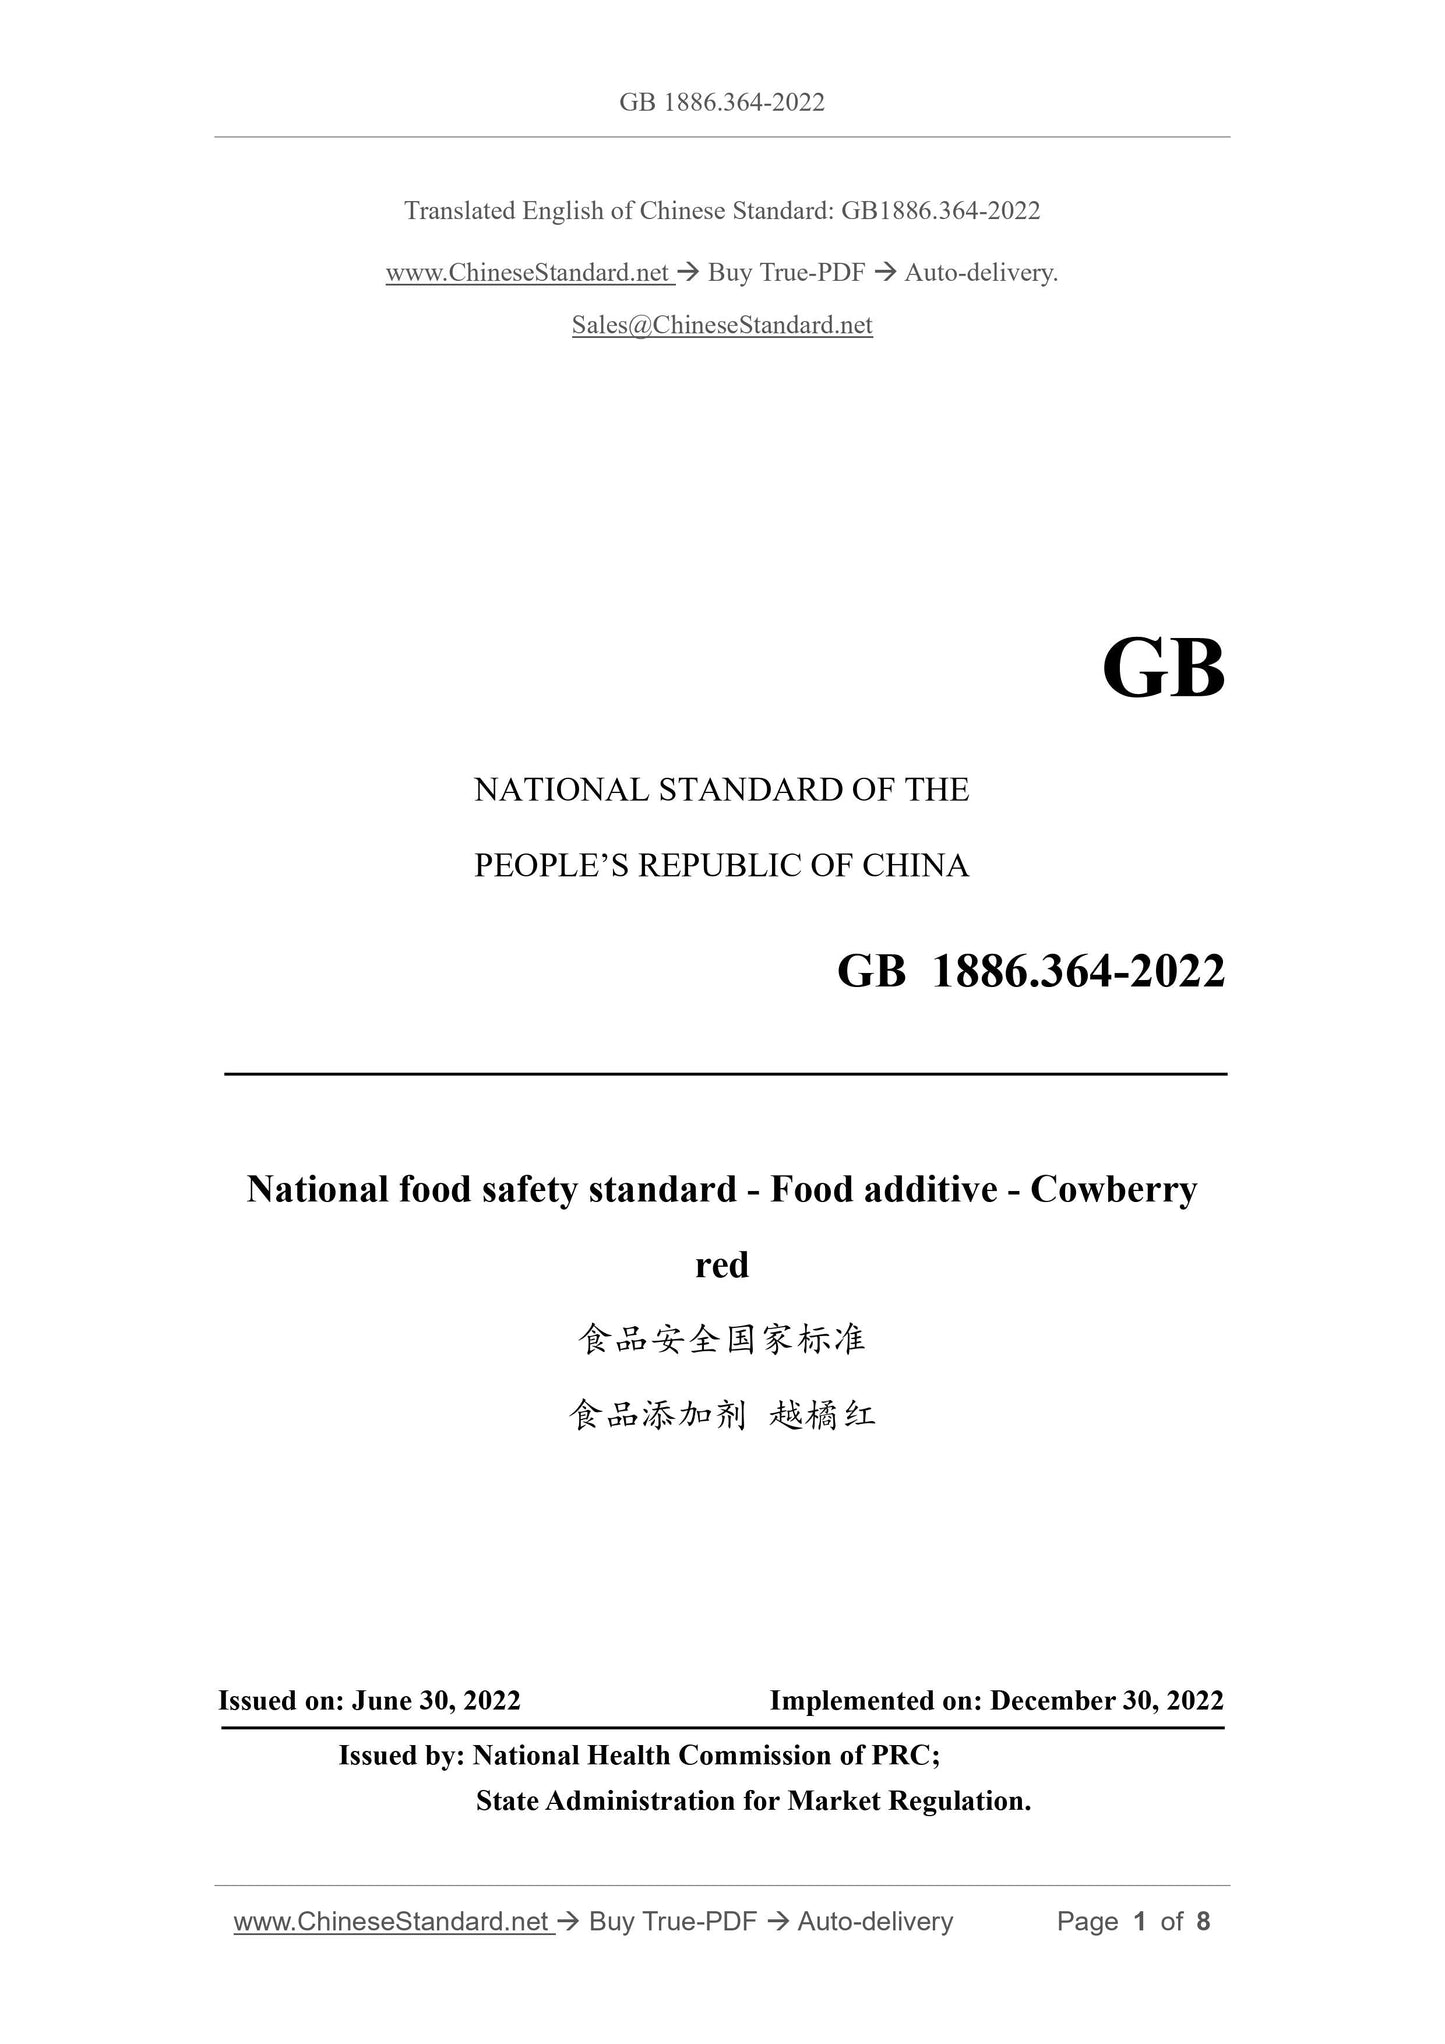 GB 1886.364-2022 Page 1